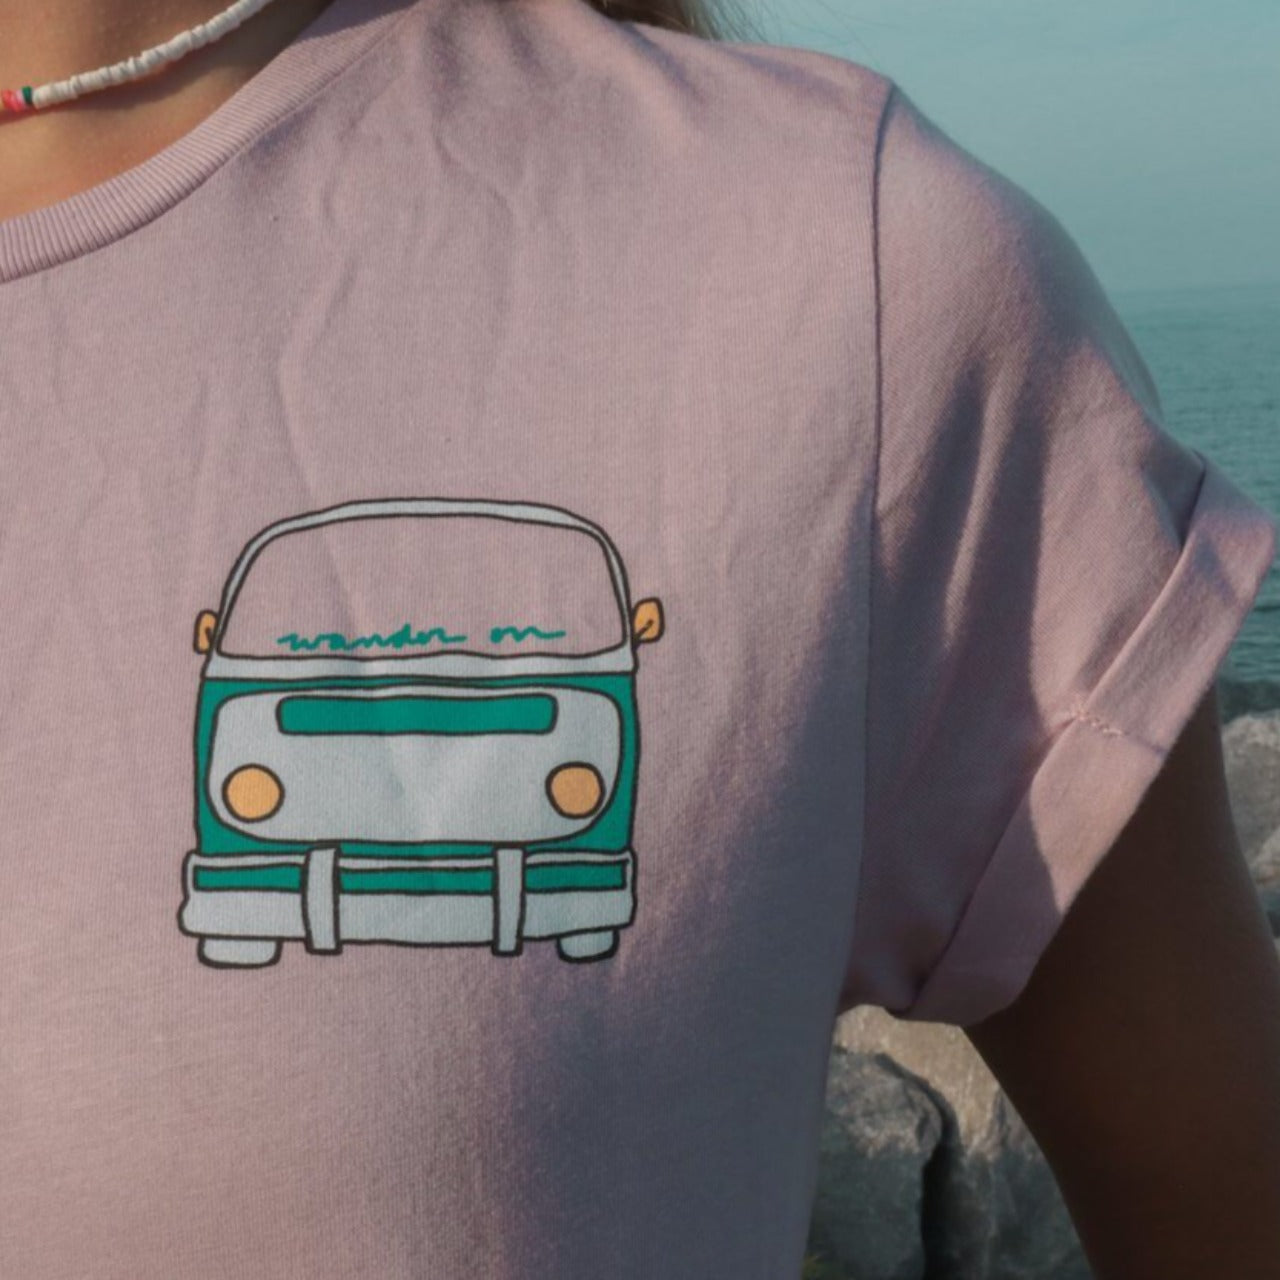 "Surf Van Rolled Sleeve Tee" featuring Wander On text. A ladies tshirt inspired by our favorite surf van, the VW bus!